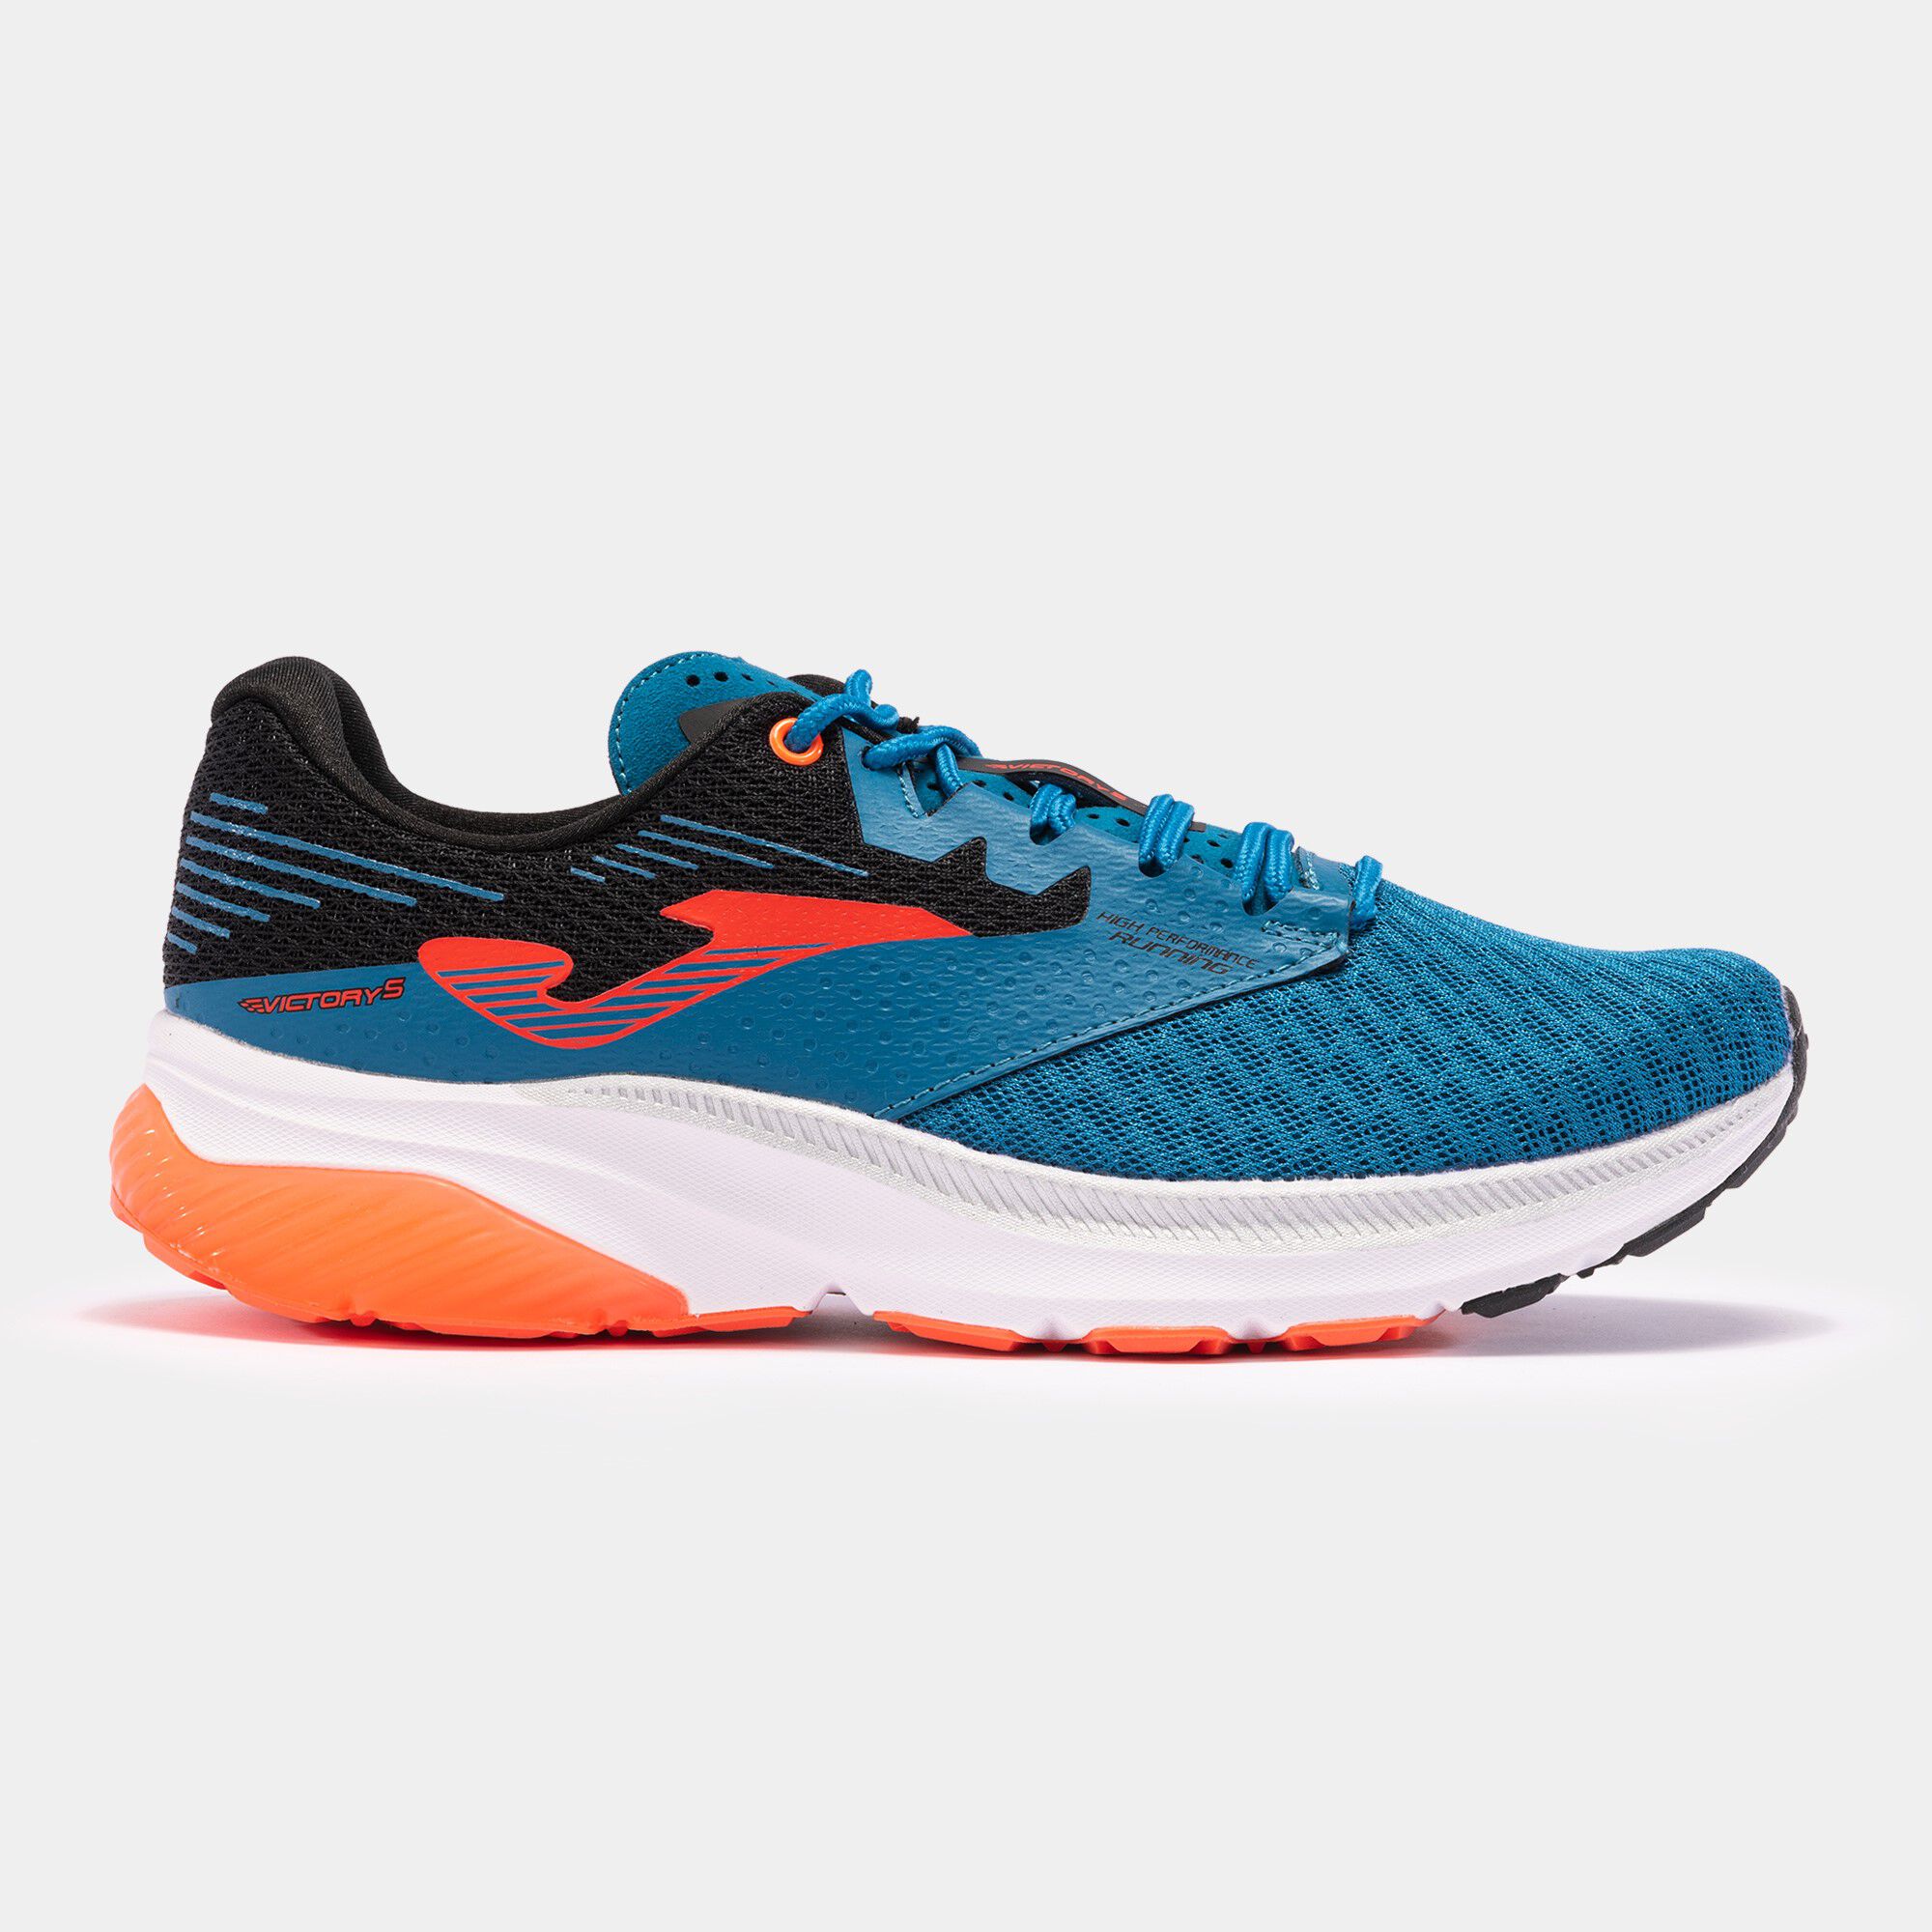 CHAUSSURES RUNNING R.VICTORY 23 HOMME BLEU PÉTROLE ROUGE